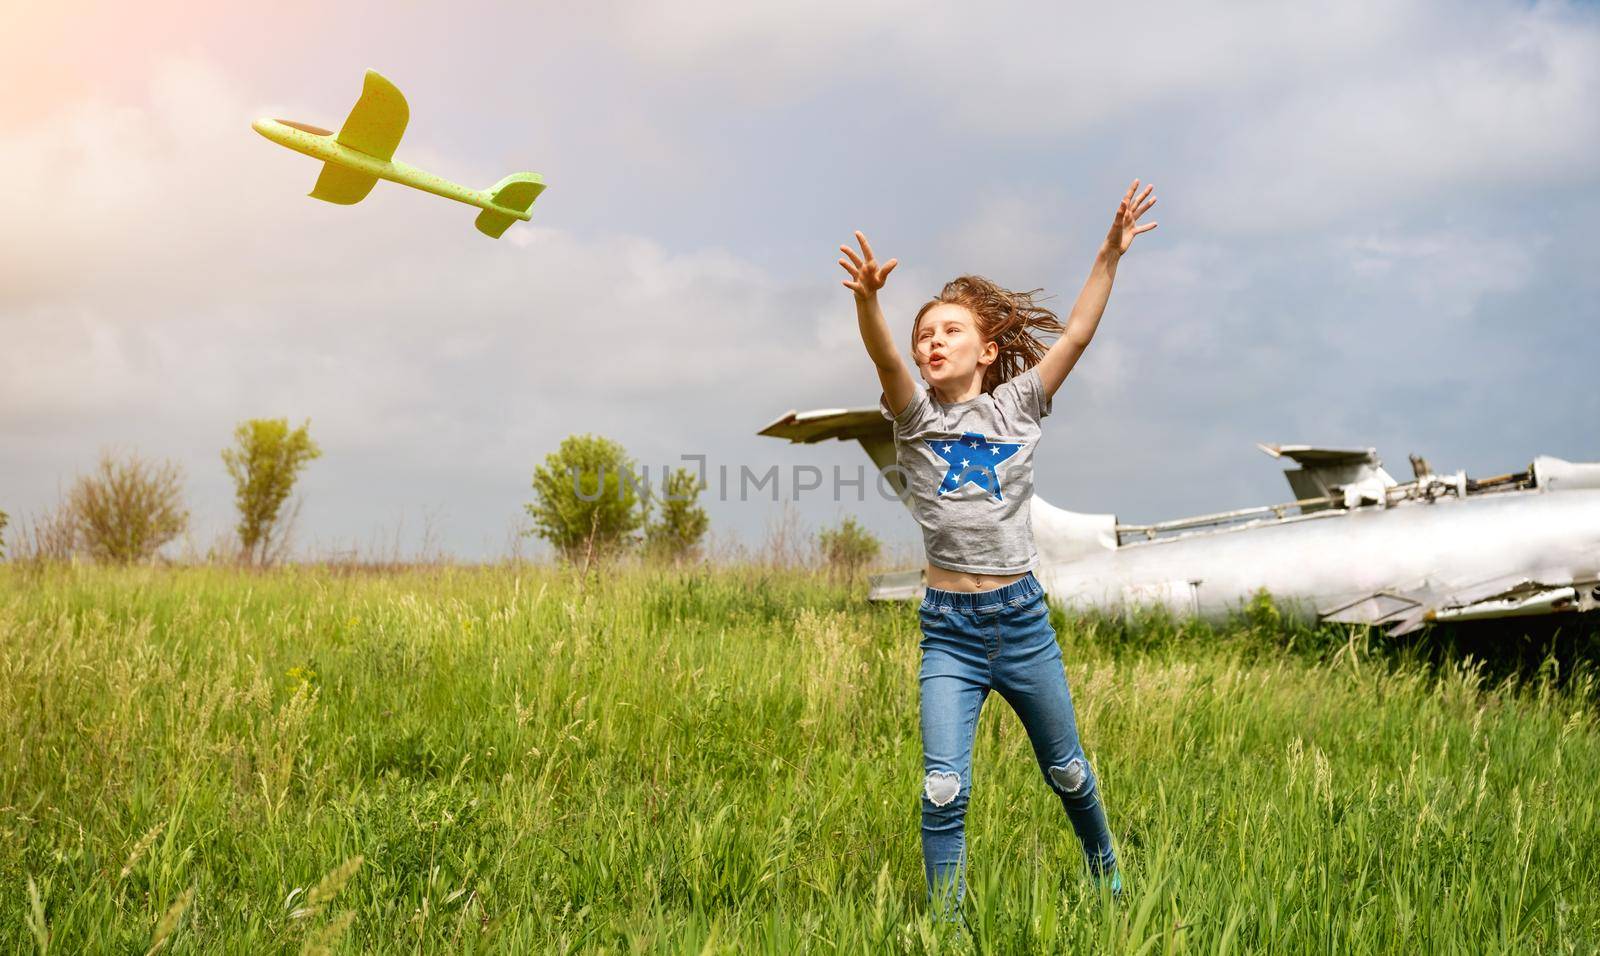 Happy child girl playing with toy plane outdoors in the field and running. Preteen kid launching airplane at the nature and smiling